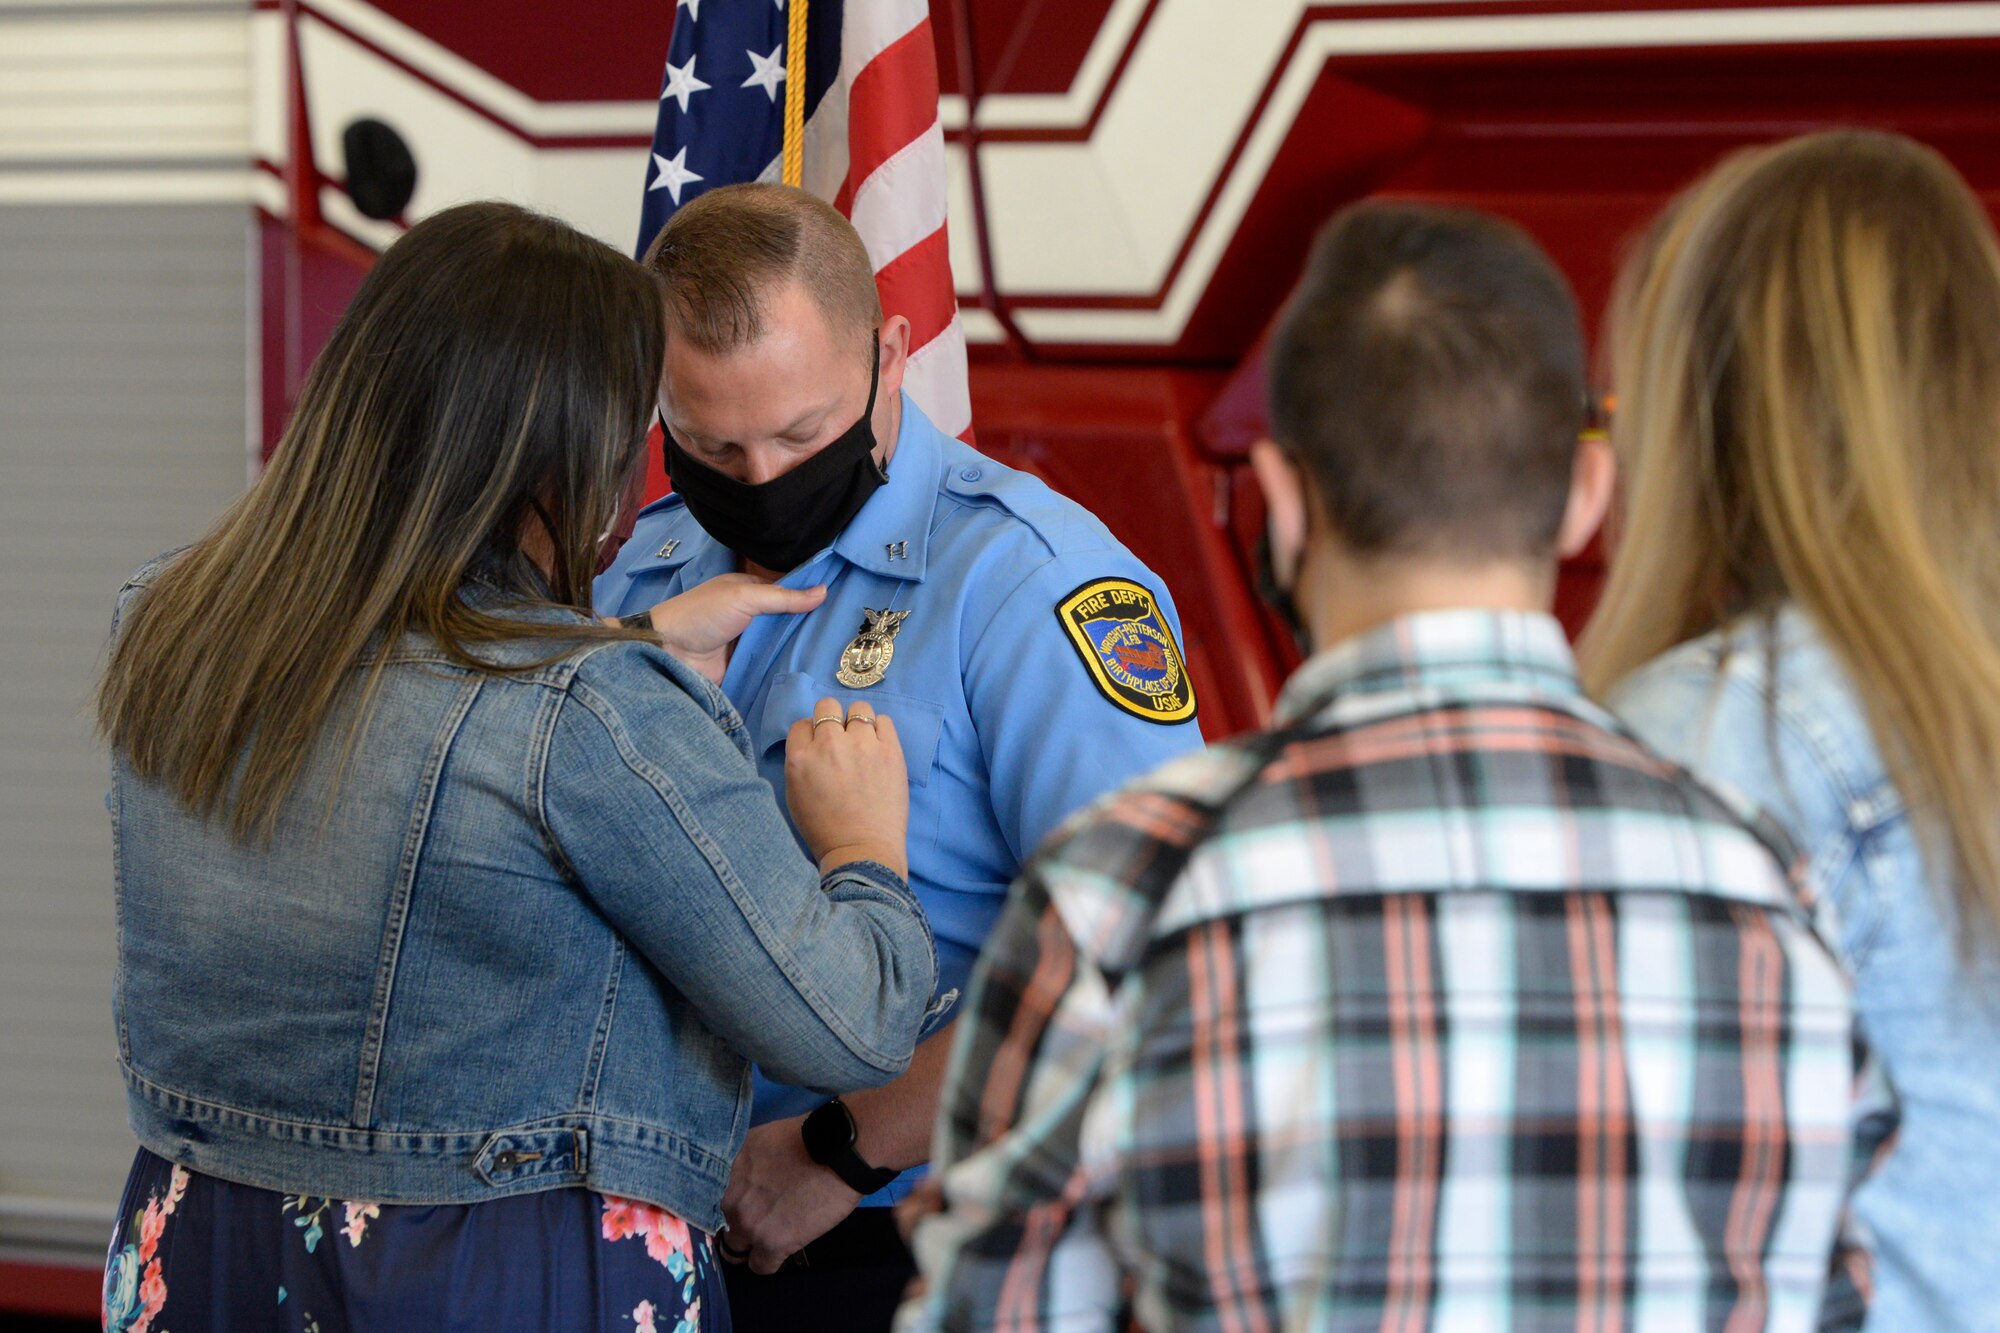 Air Force firefighter Capt. James Hammond with the 788th Civil Engineer Squadron, is pinned on by his wife, Ashlee, and children J.J. and Madison during a promotion ceremony at Wright-Patterson Air Force Base, Ohio on Monday, March 29, 2021.